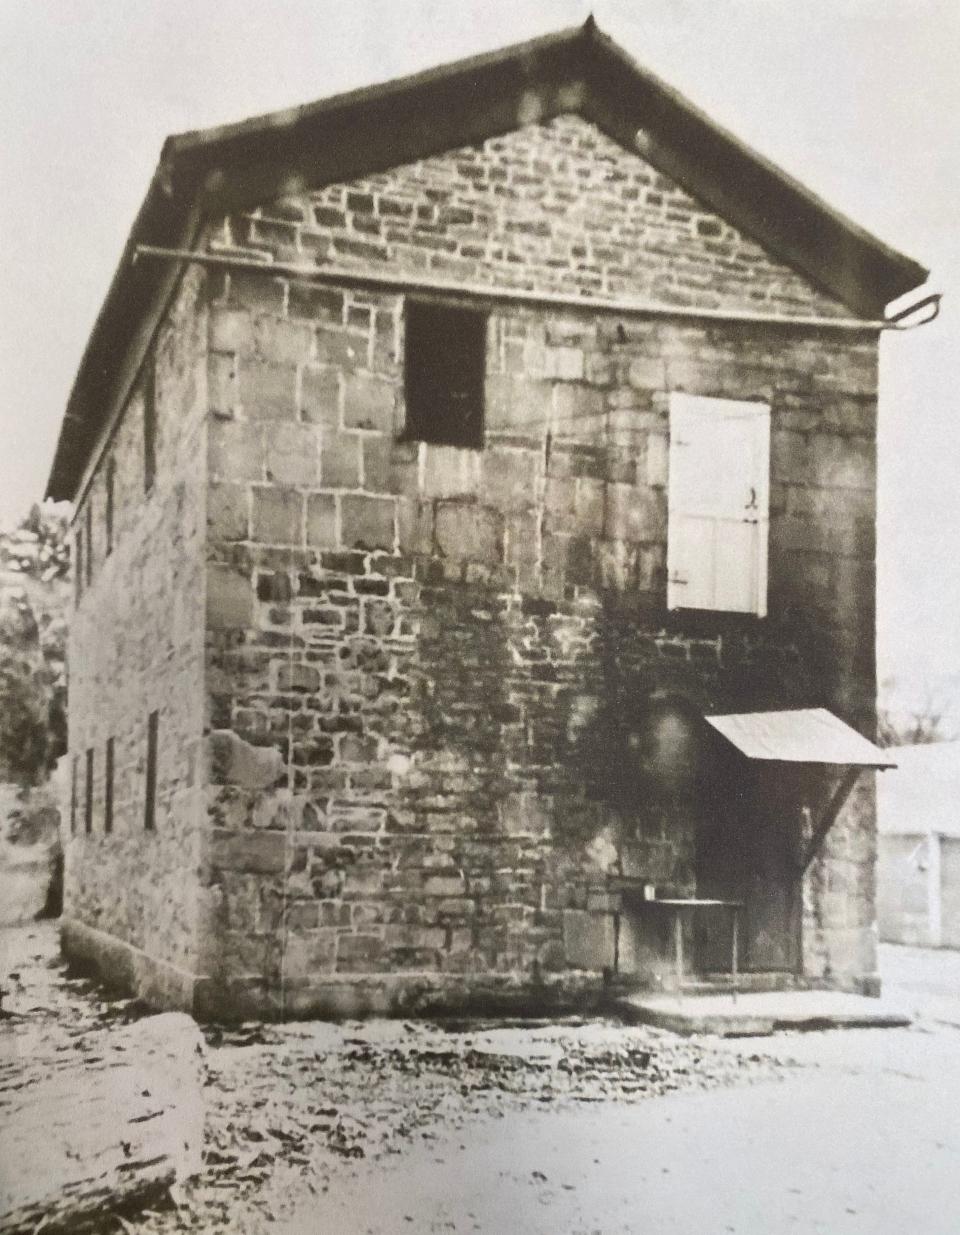 In 1930, the Schoharie County Jail was a separate building behind the county courthouse.